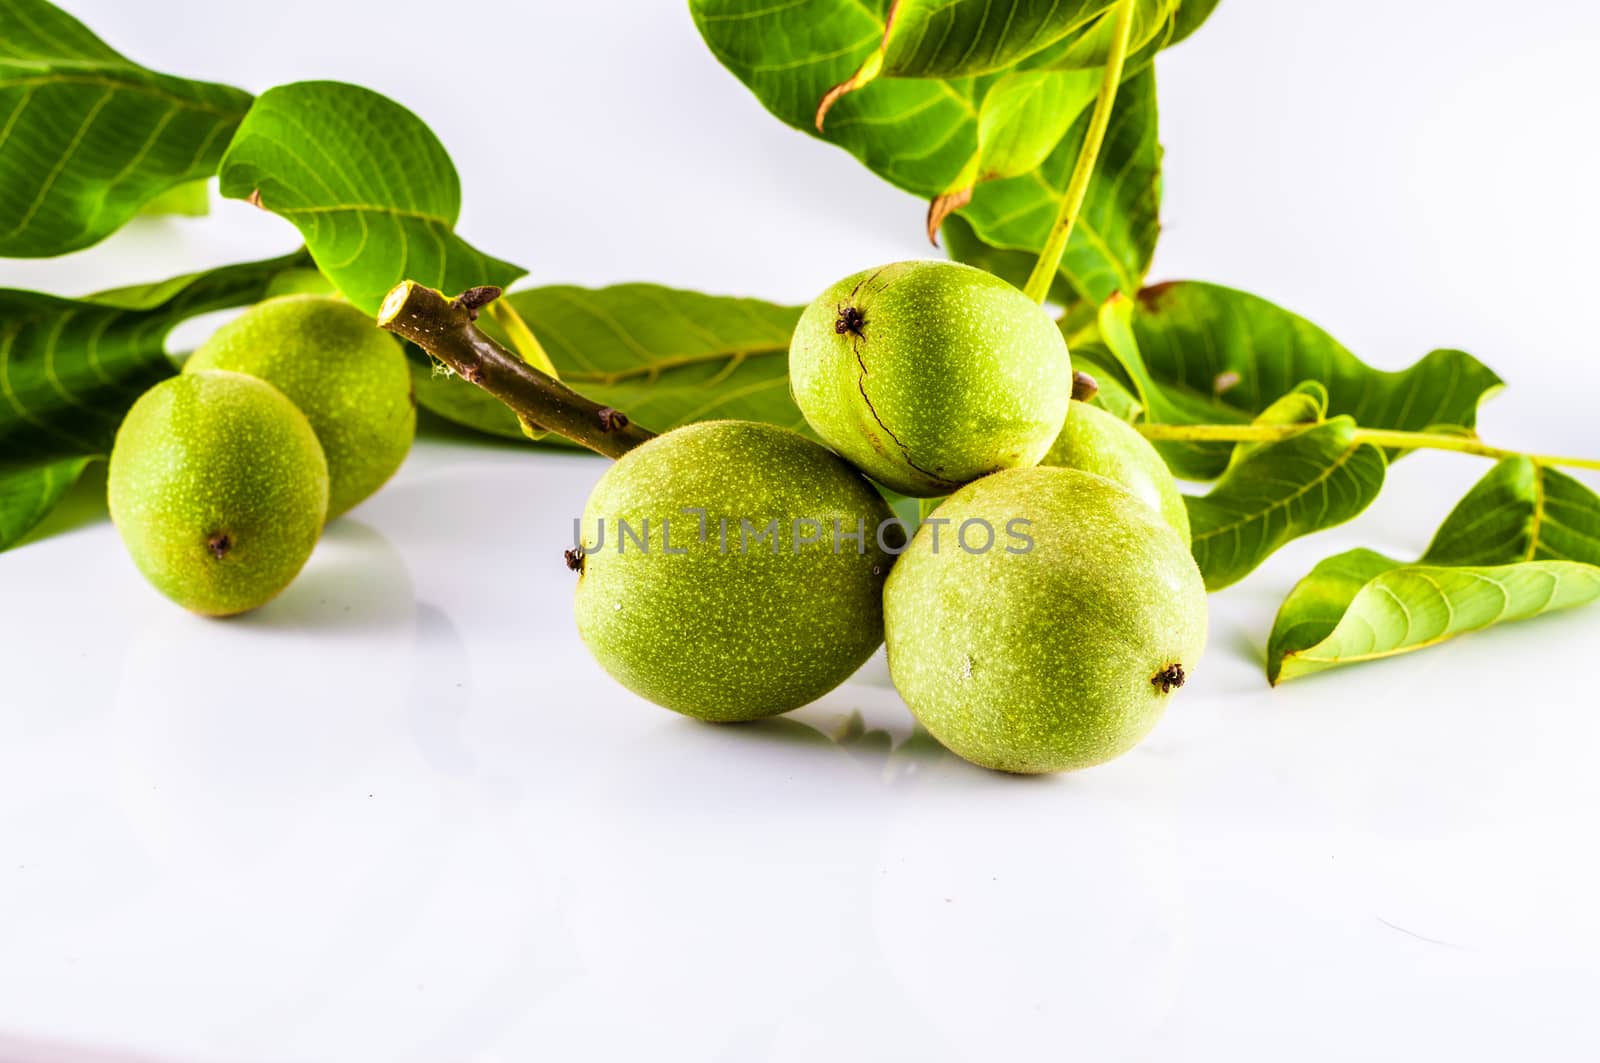 Isolated fresh walnuts on white background by replica